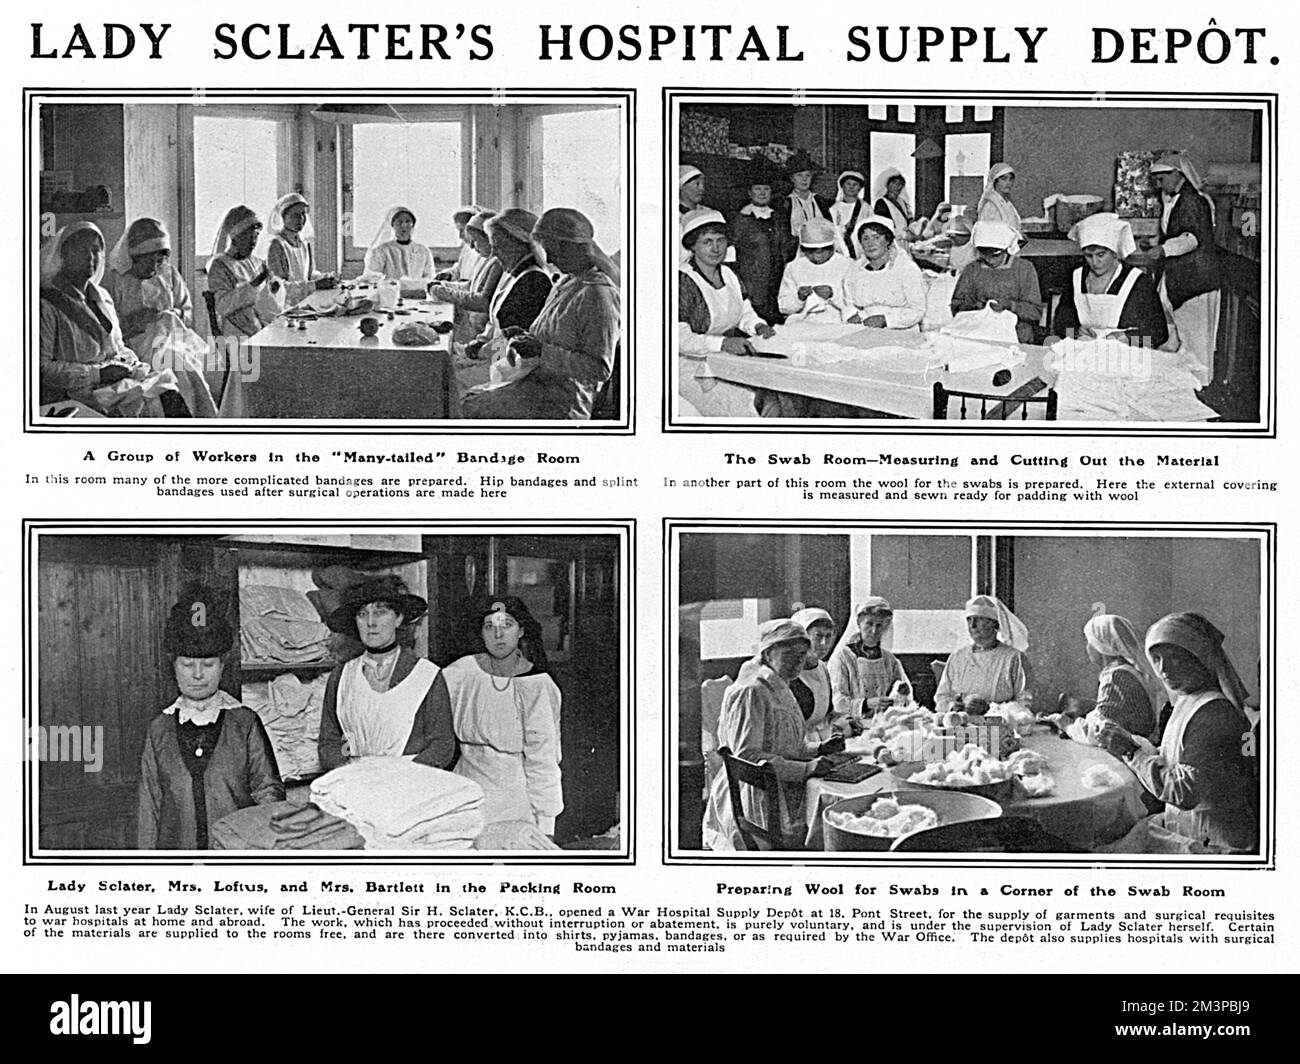 Four photographs in the Sphere magazine reporting on the War Hospital Supply Dept opened in August 1915 by Lady Sclater, wife of Lieut.-General Sir H. Sclater at 18 Pont Street, London to supply garments and surgical requisites to war hospitals at home and abroad.  The work was purely voluntary and done under the supervision of Lady Sclater herself. In a six month period from January to June 1917, 19,813 ladies attended, making and despatching a staggering 174,000 articles from life-saving waistcoats for men on mine-sweepers to hospital slippers.       Date: 1916 Stock Photo